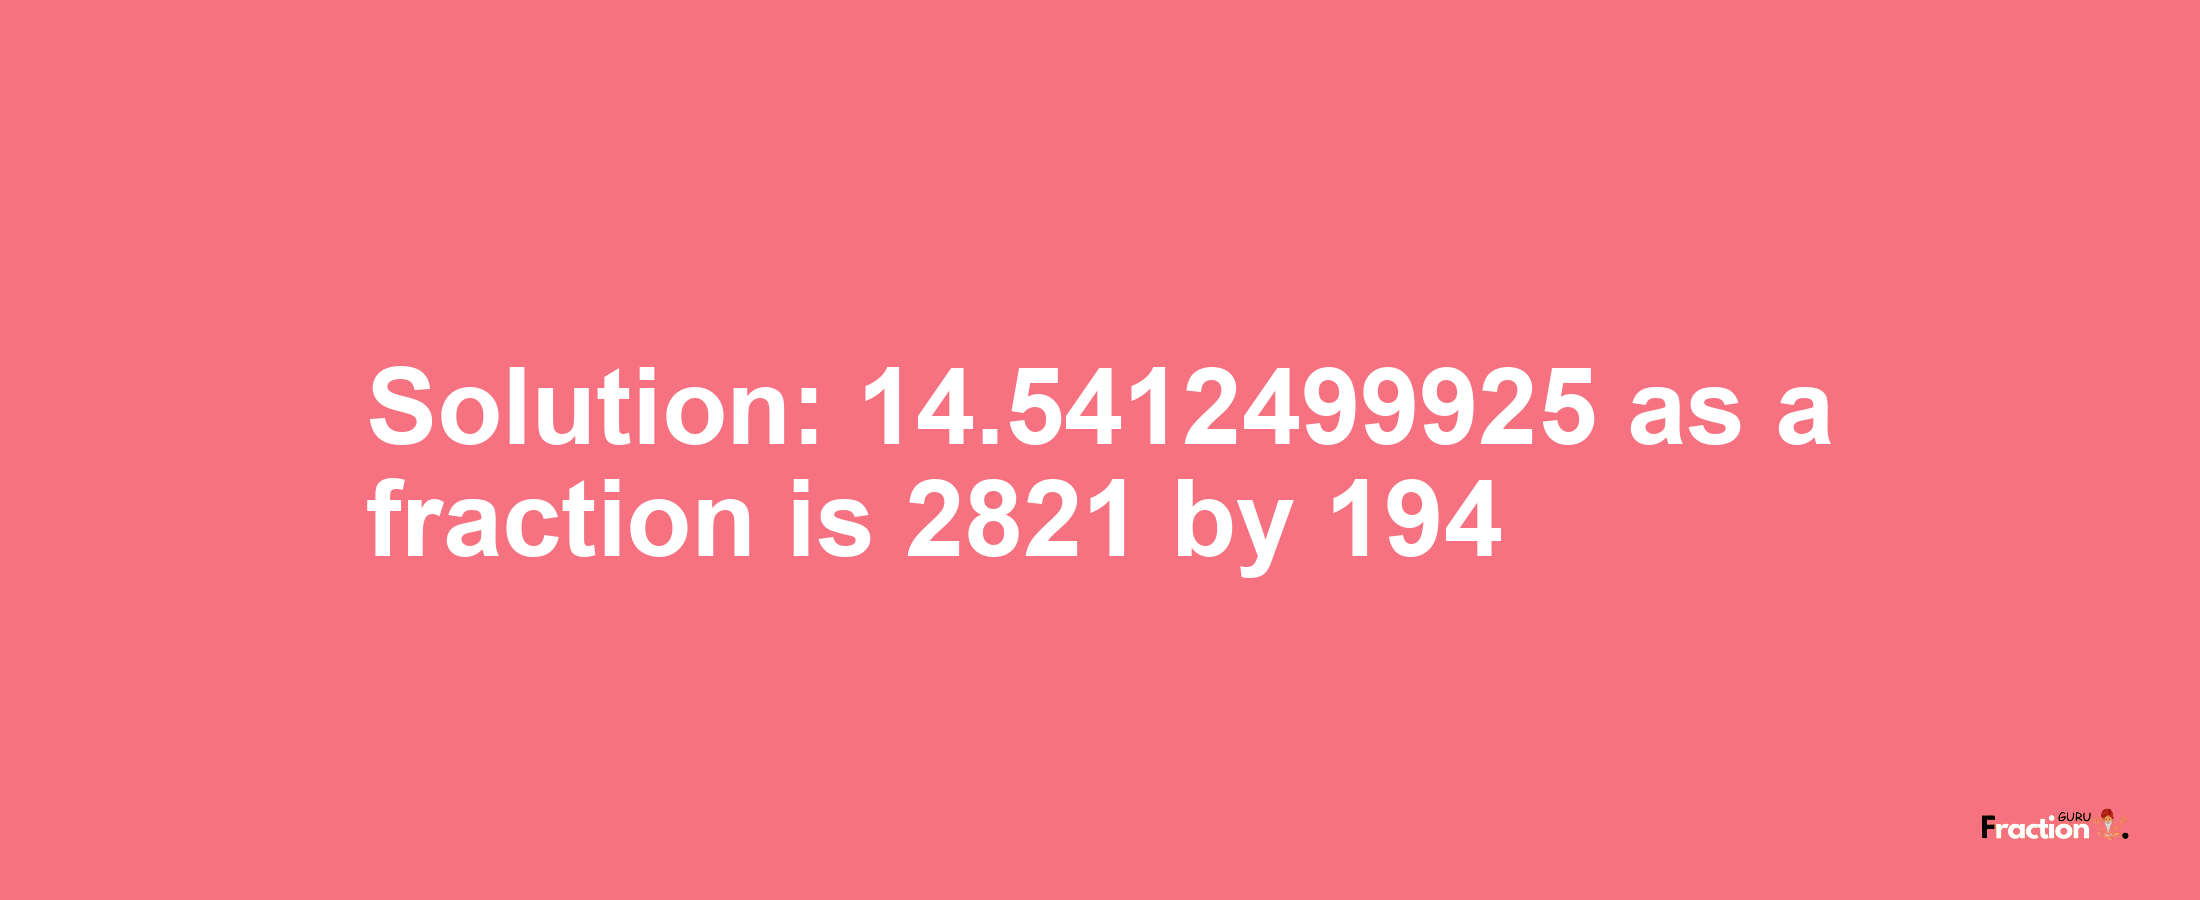 Solution:14.5412499925 as a fraction is 2821/194